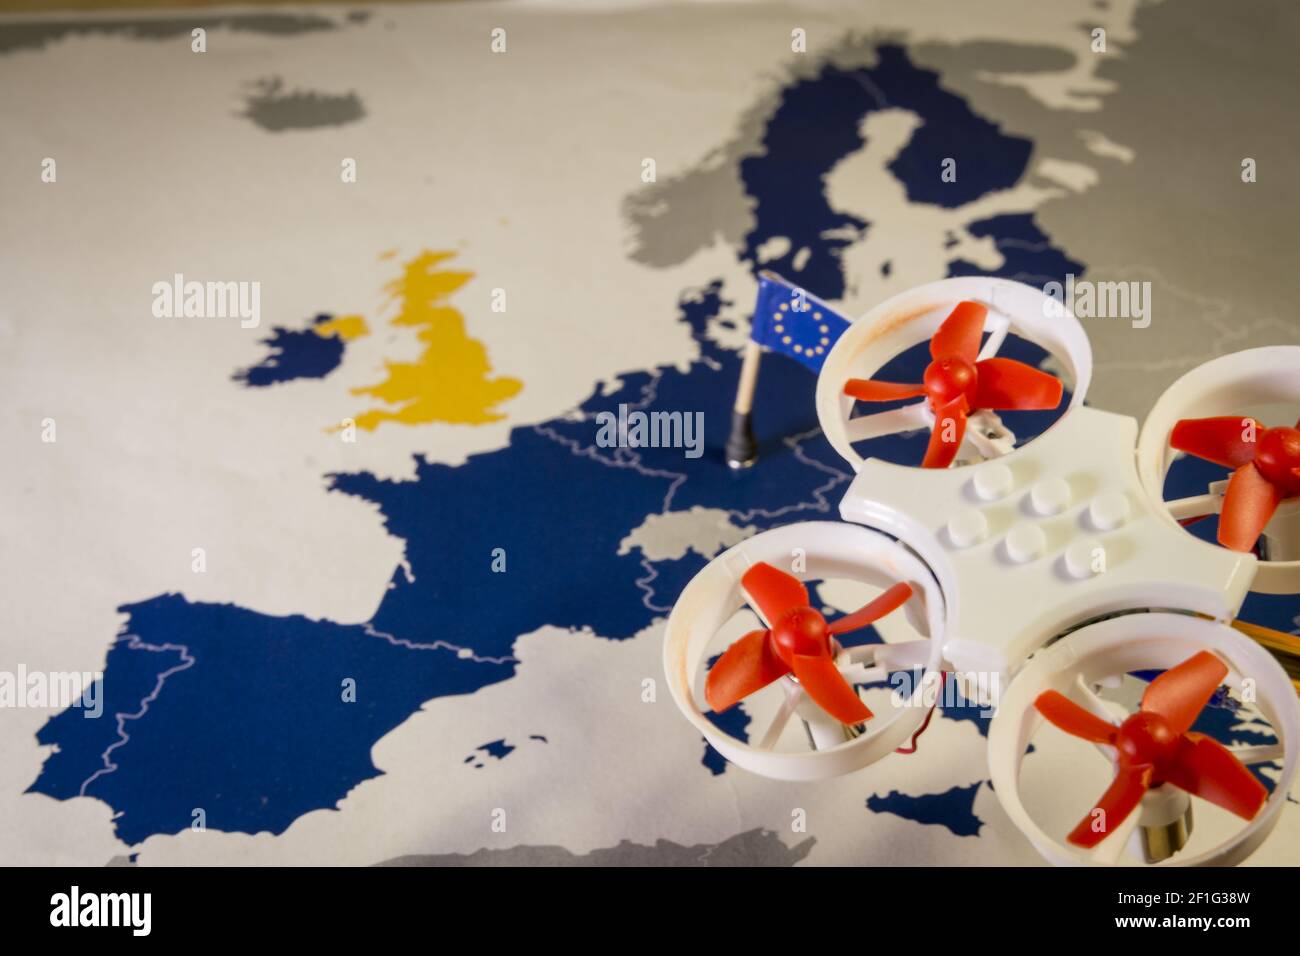 Mini drone flying over a EU map. European rules for drone aerial aircraft law concept Stock Photo